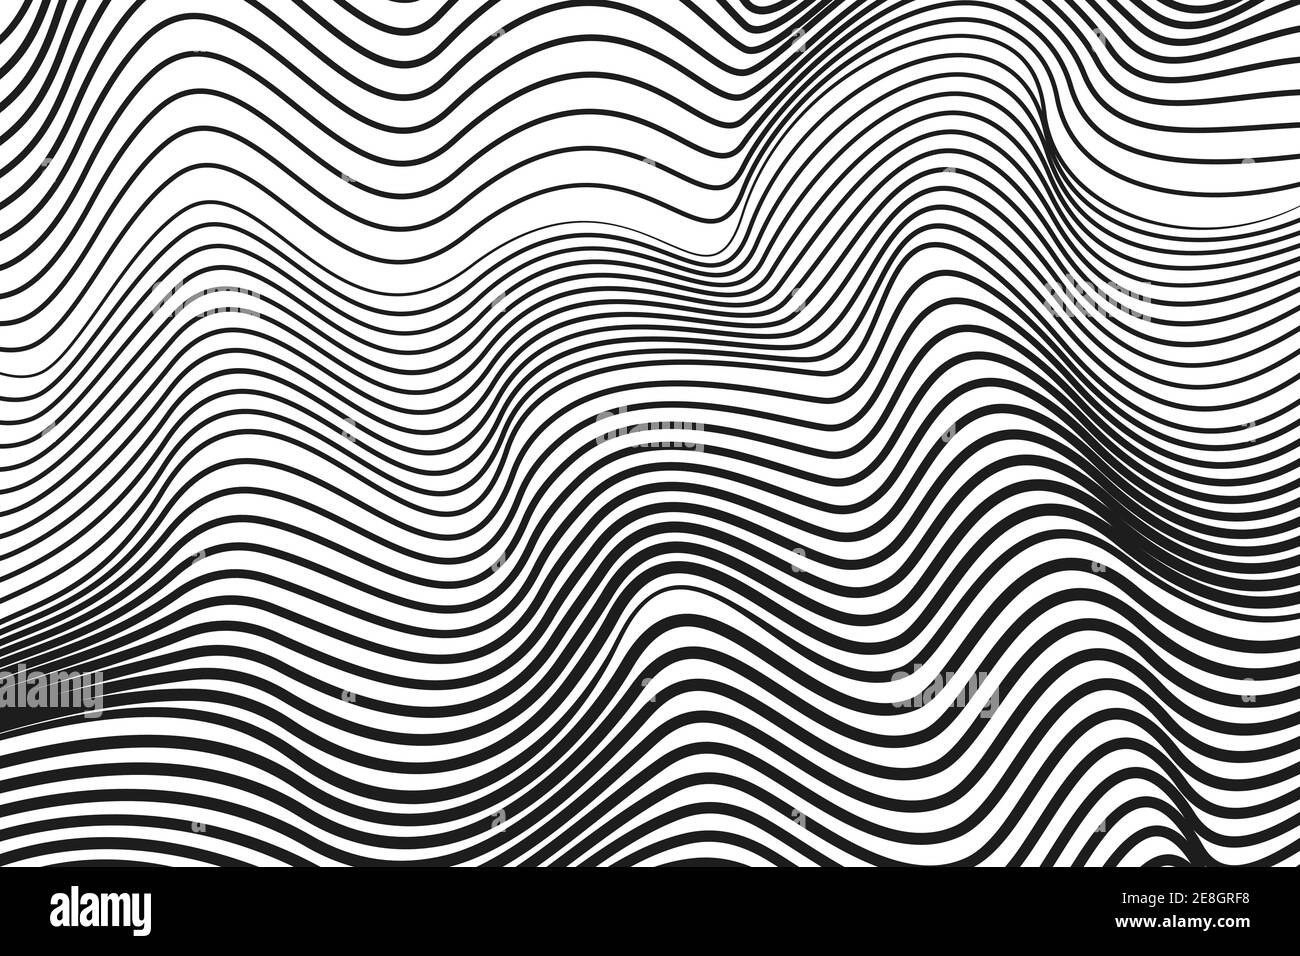 Black ripple curves, white background. Monochrome radio, sound waves. Abstract technology striped pattern. Vector modern line art design. EPS10 Stock Vector